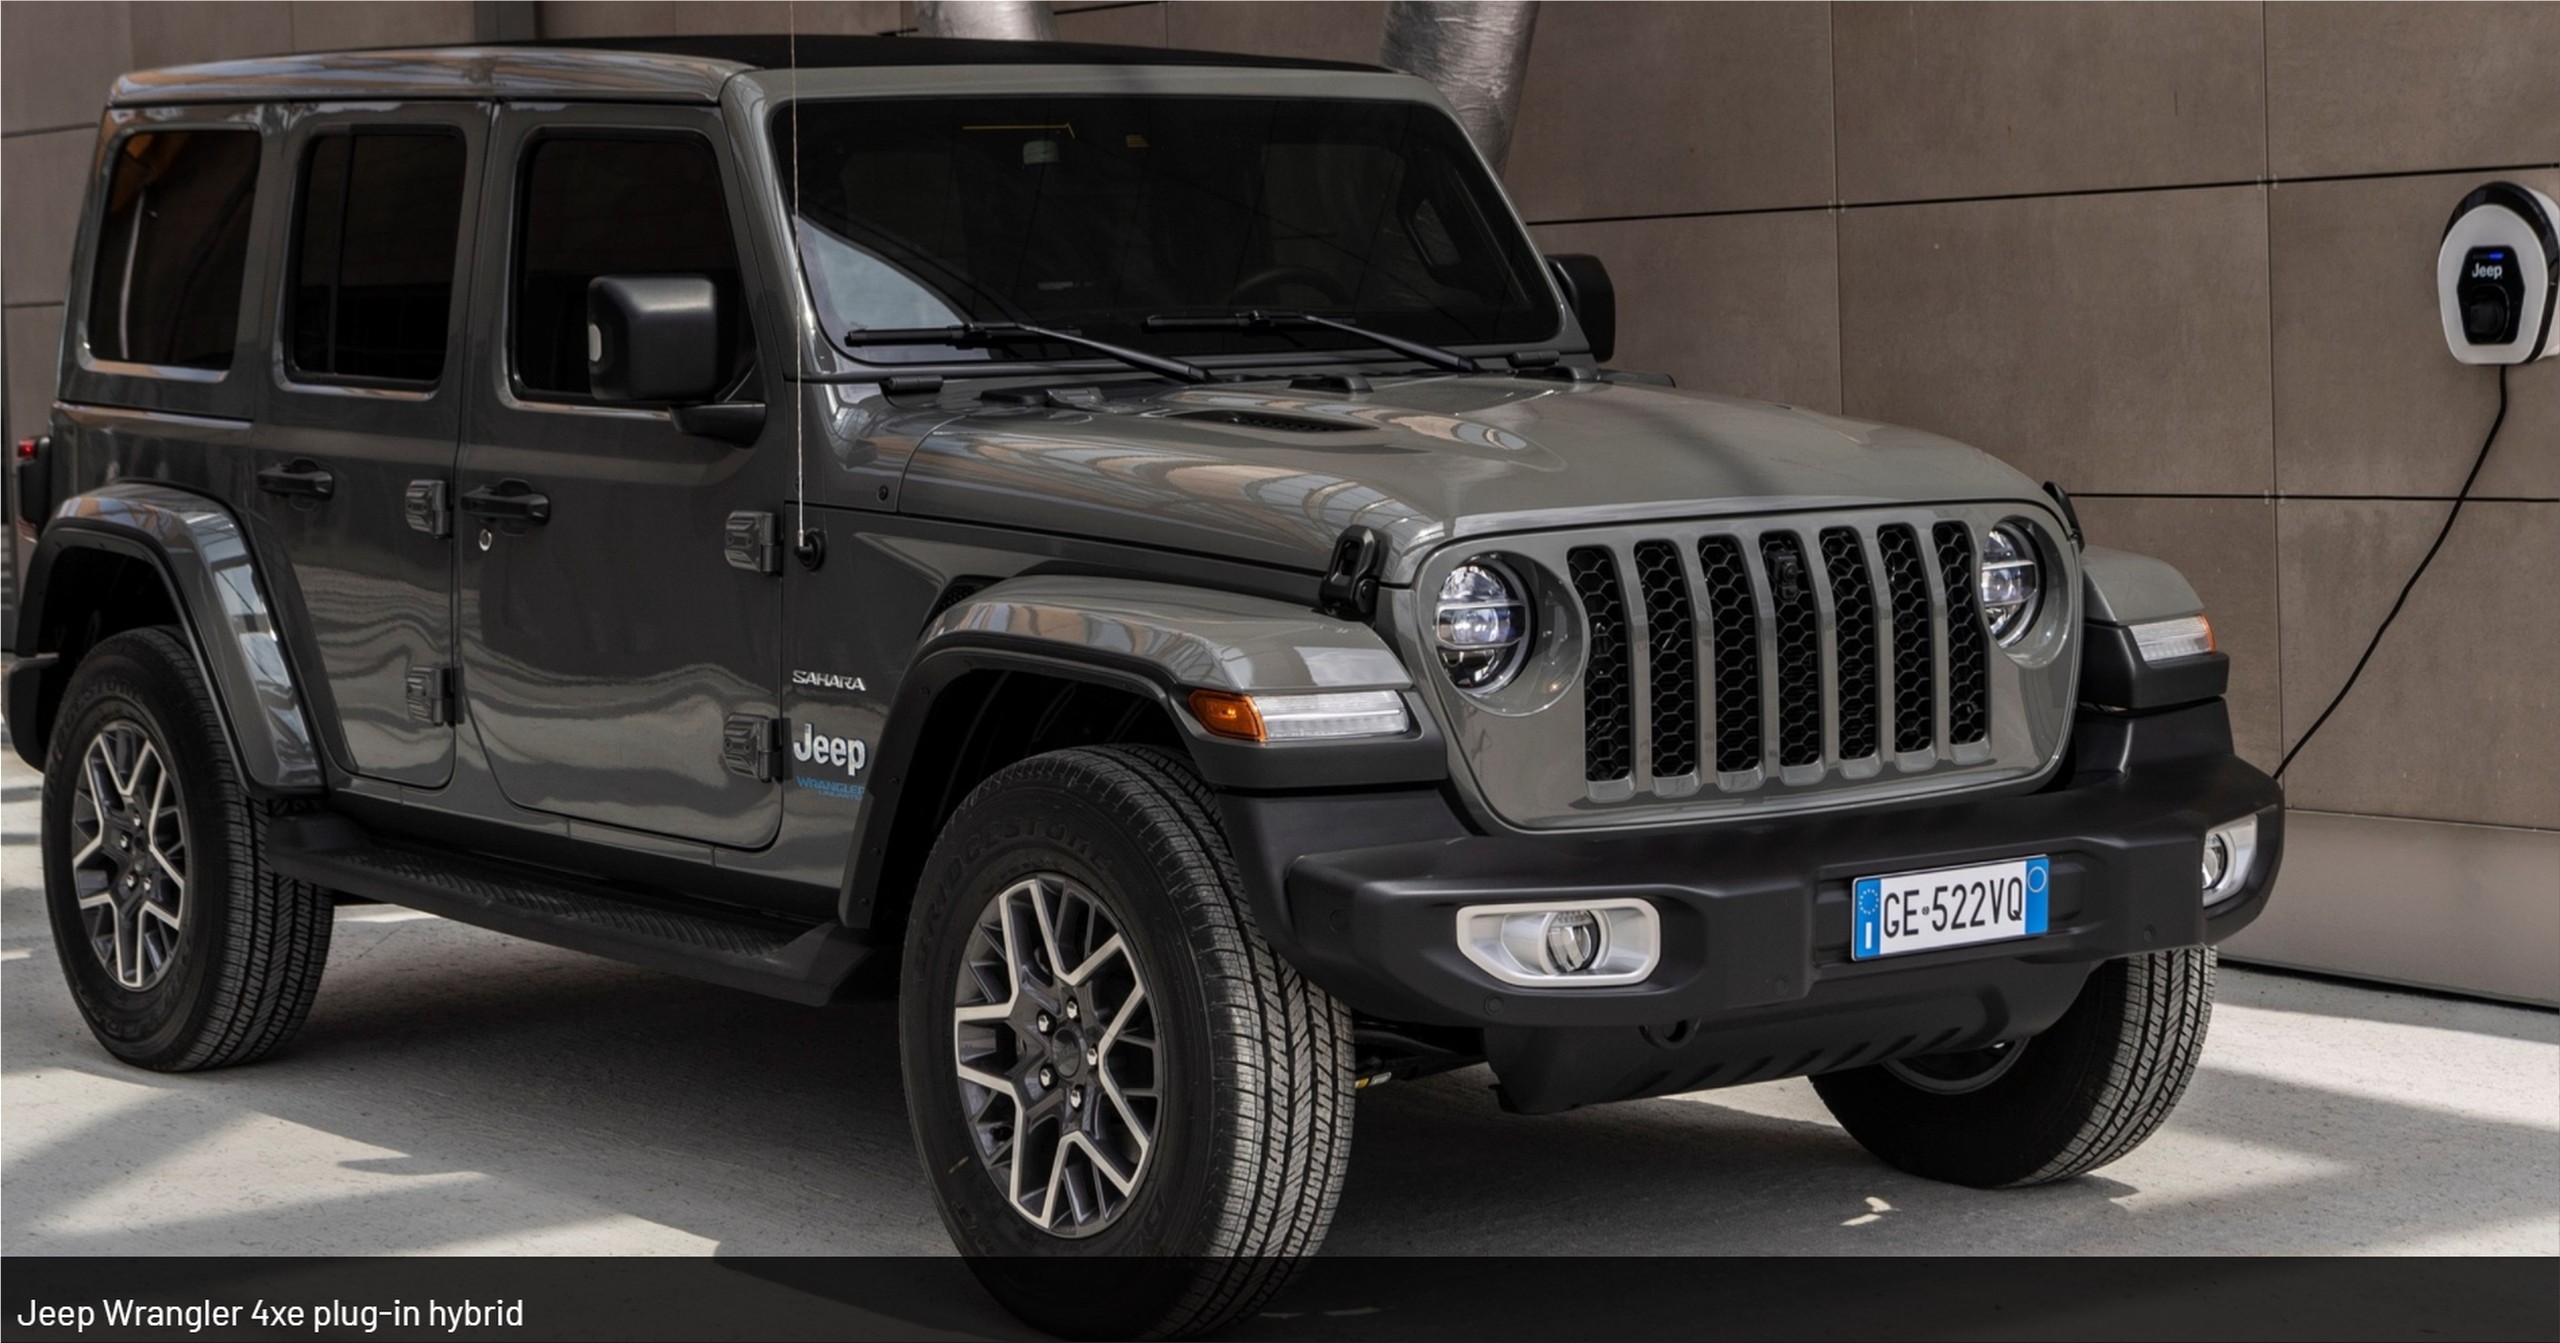 The new Jeep Wrangler 4xe plug-in hybrid with 380 hp | Panorica